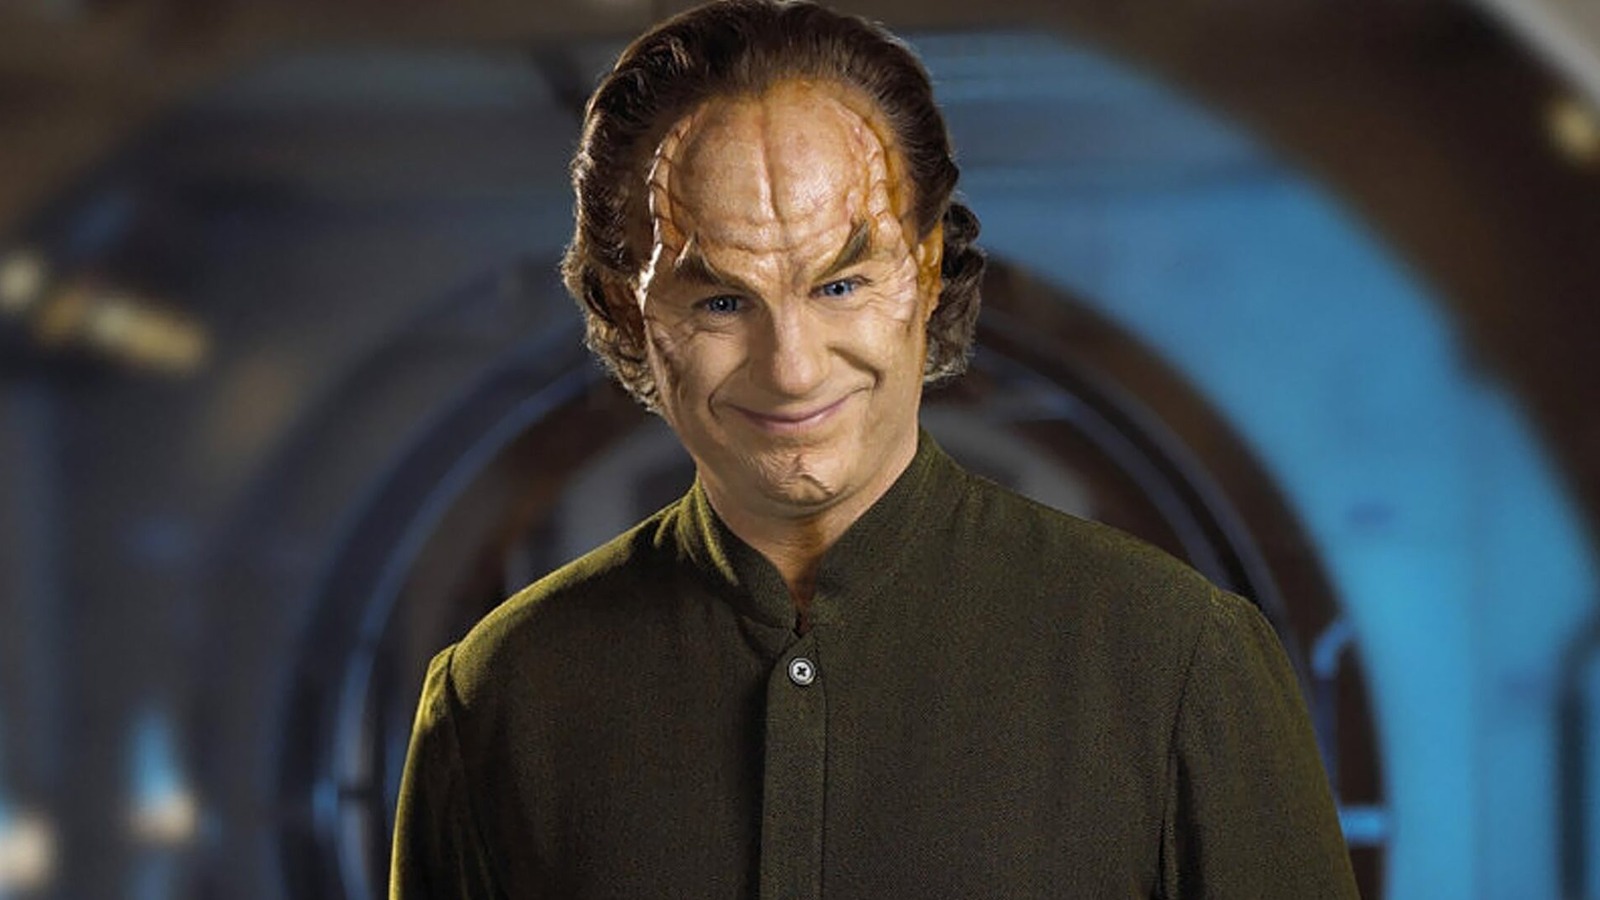 obscure star trek characters